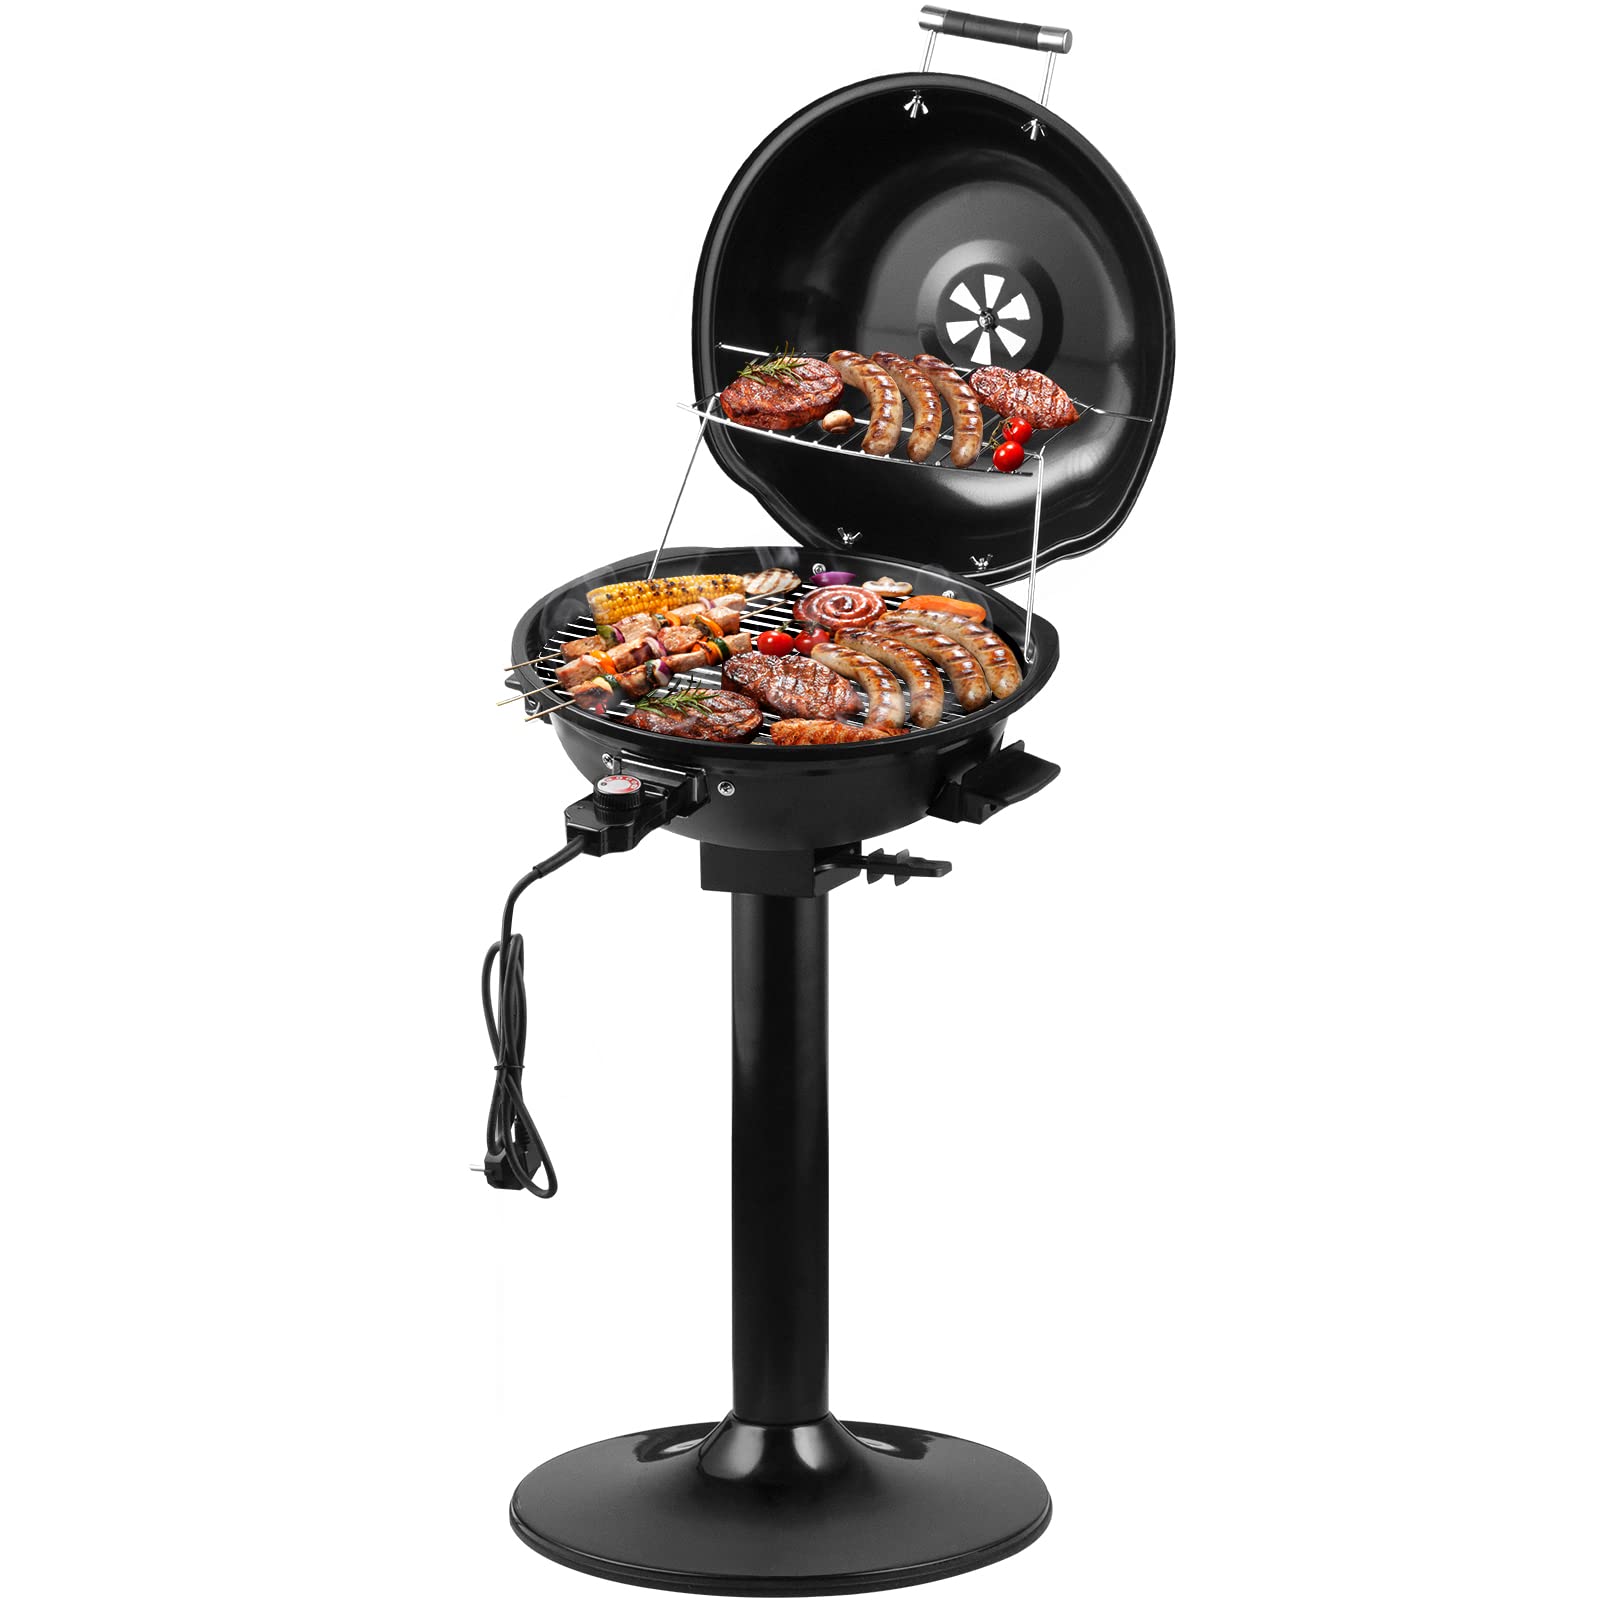 Cusimax 1600W Electric Stand Grill for Indoor and Outdoor Use